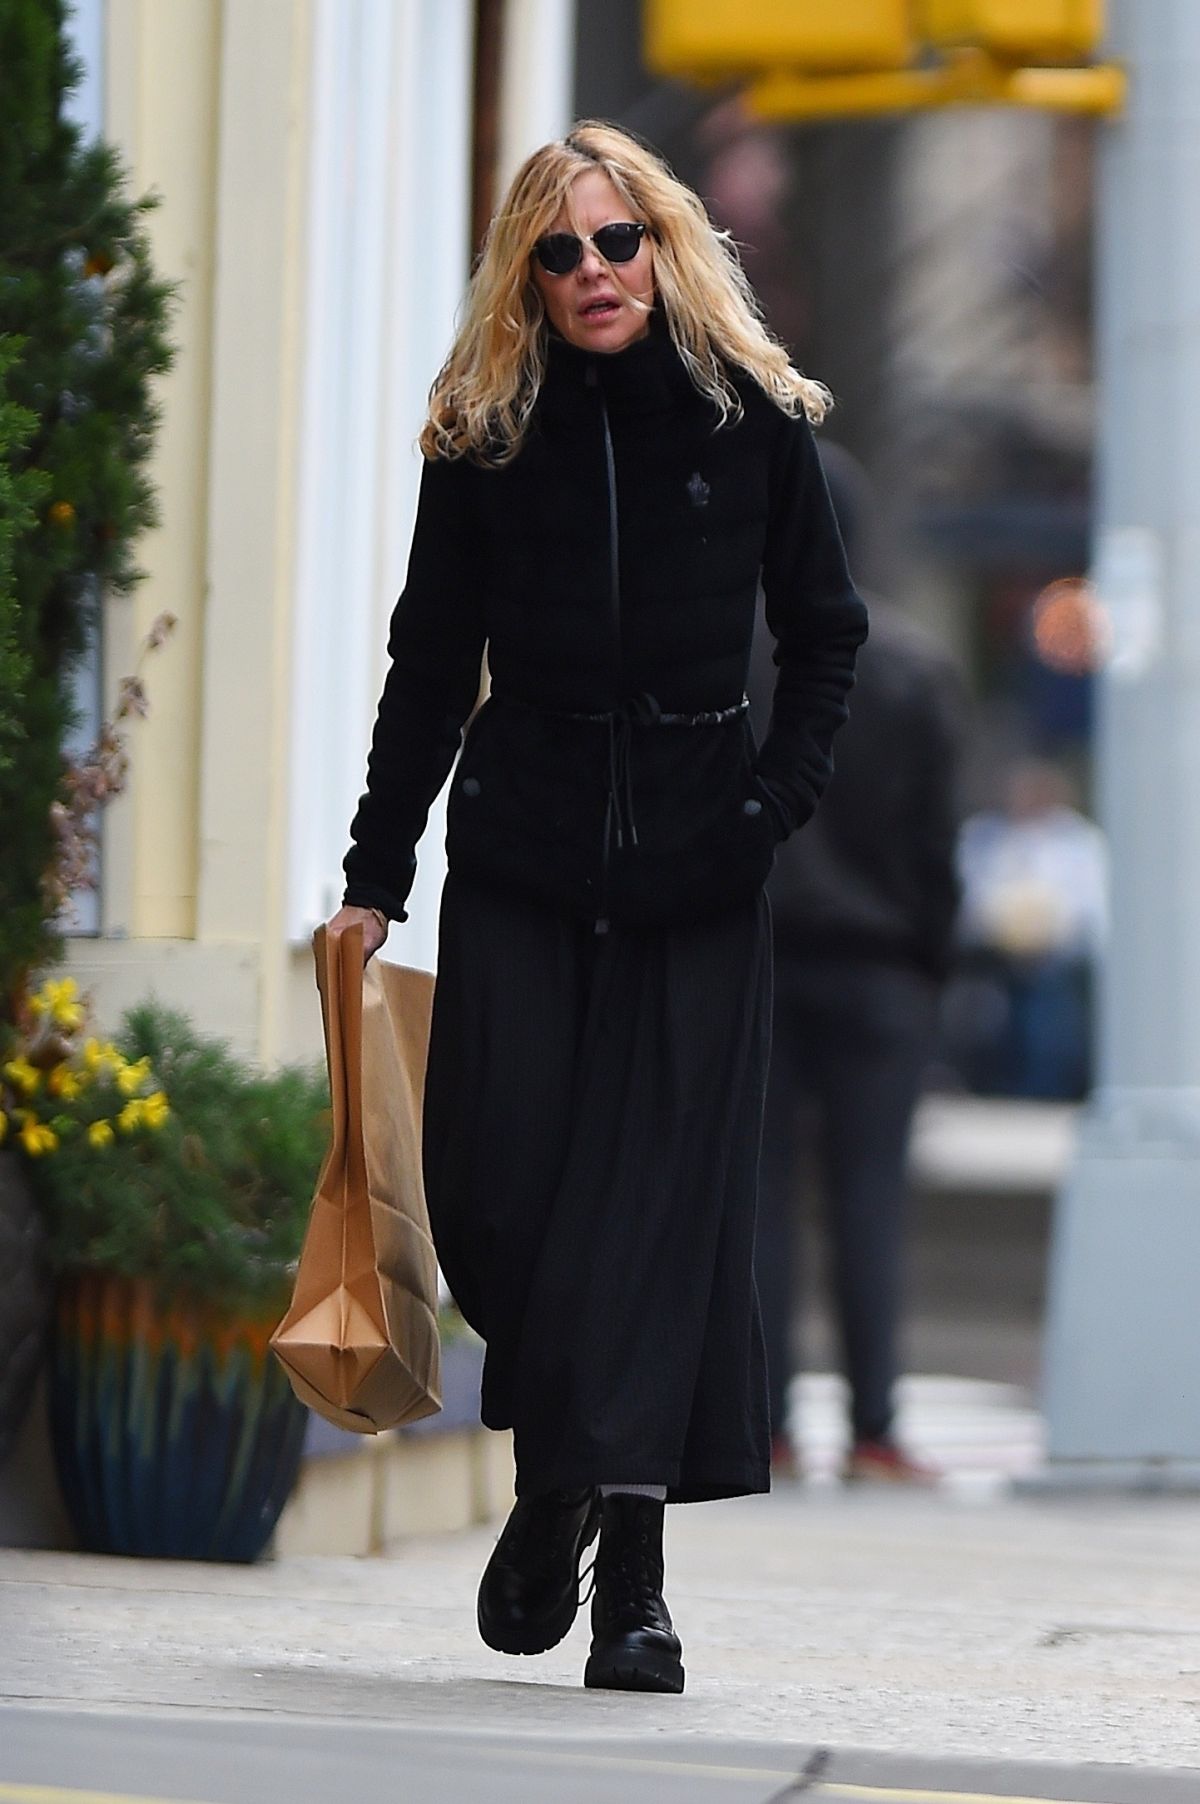 MEG RYAN Out and About in New York 11/17/2022 – HawtCelebs